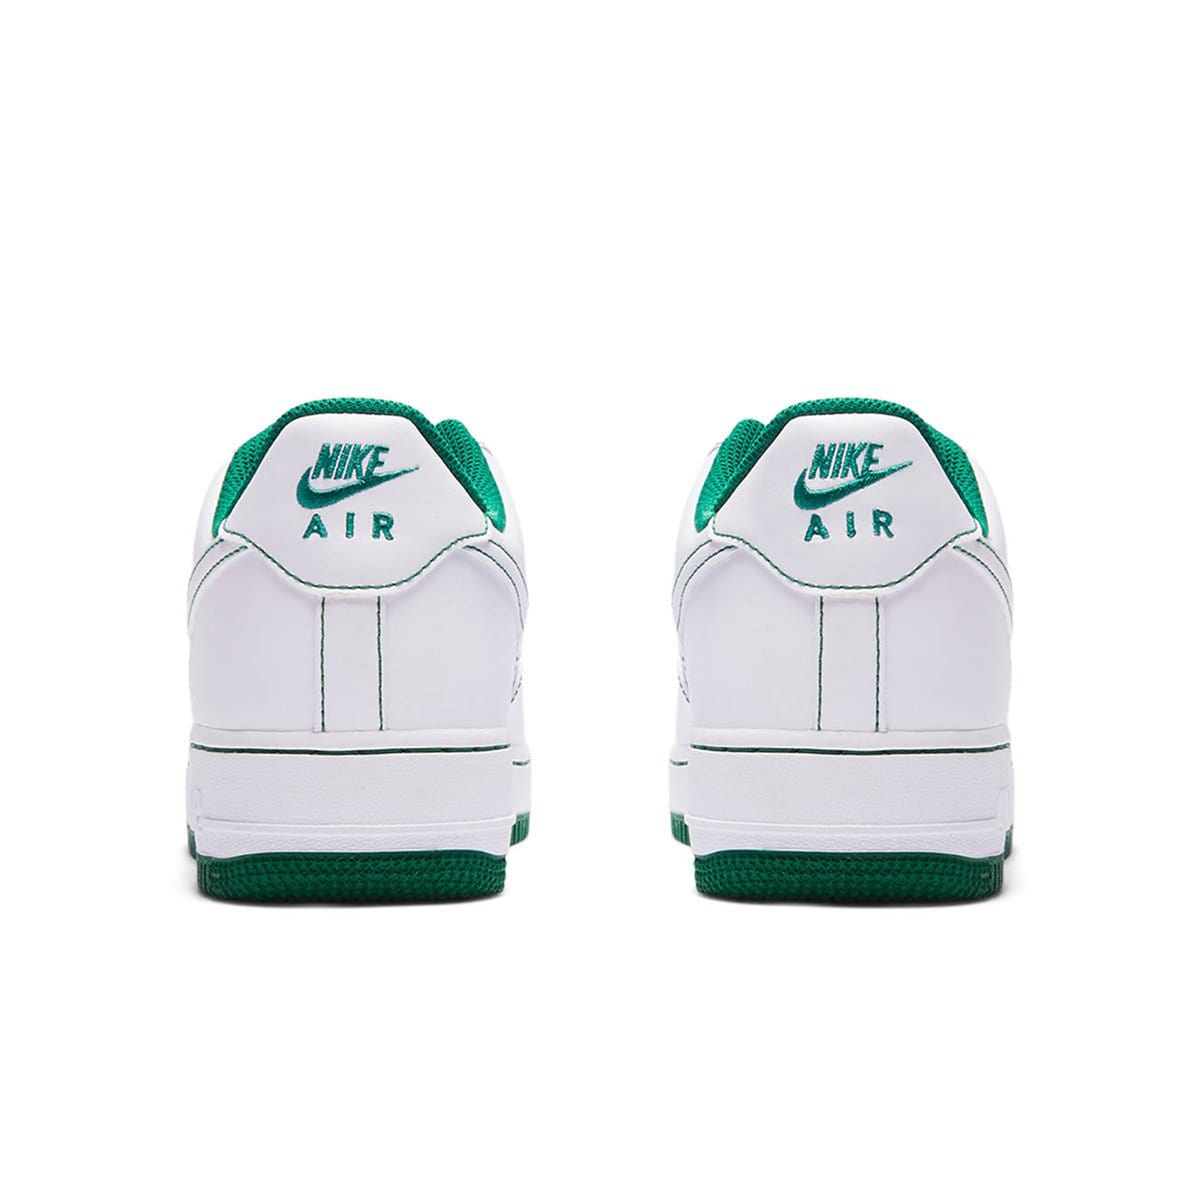 Nike Air Force 1 '07 'Contrast Stitch - White Pine Green